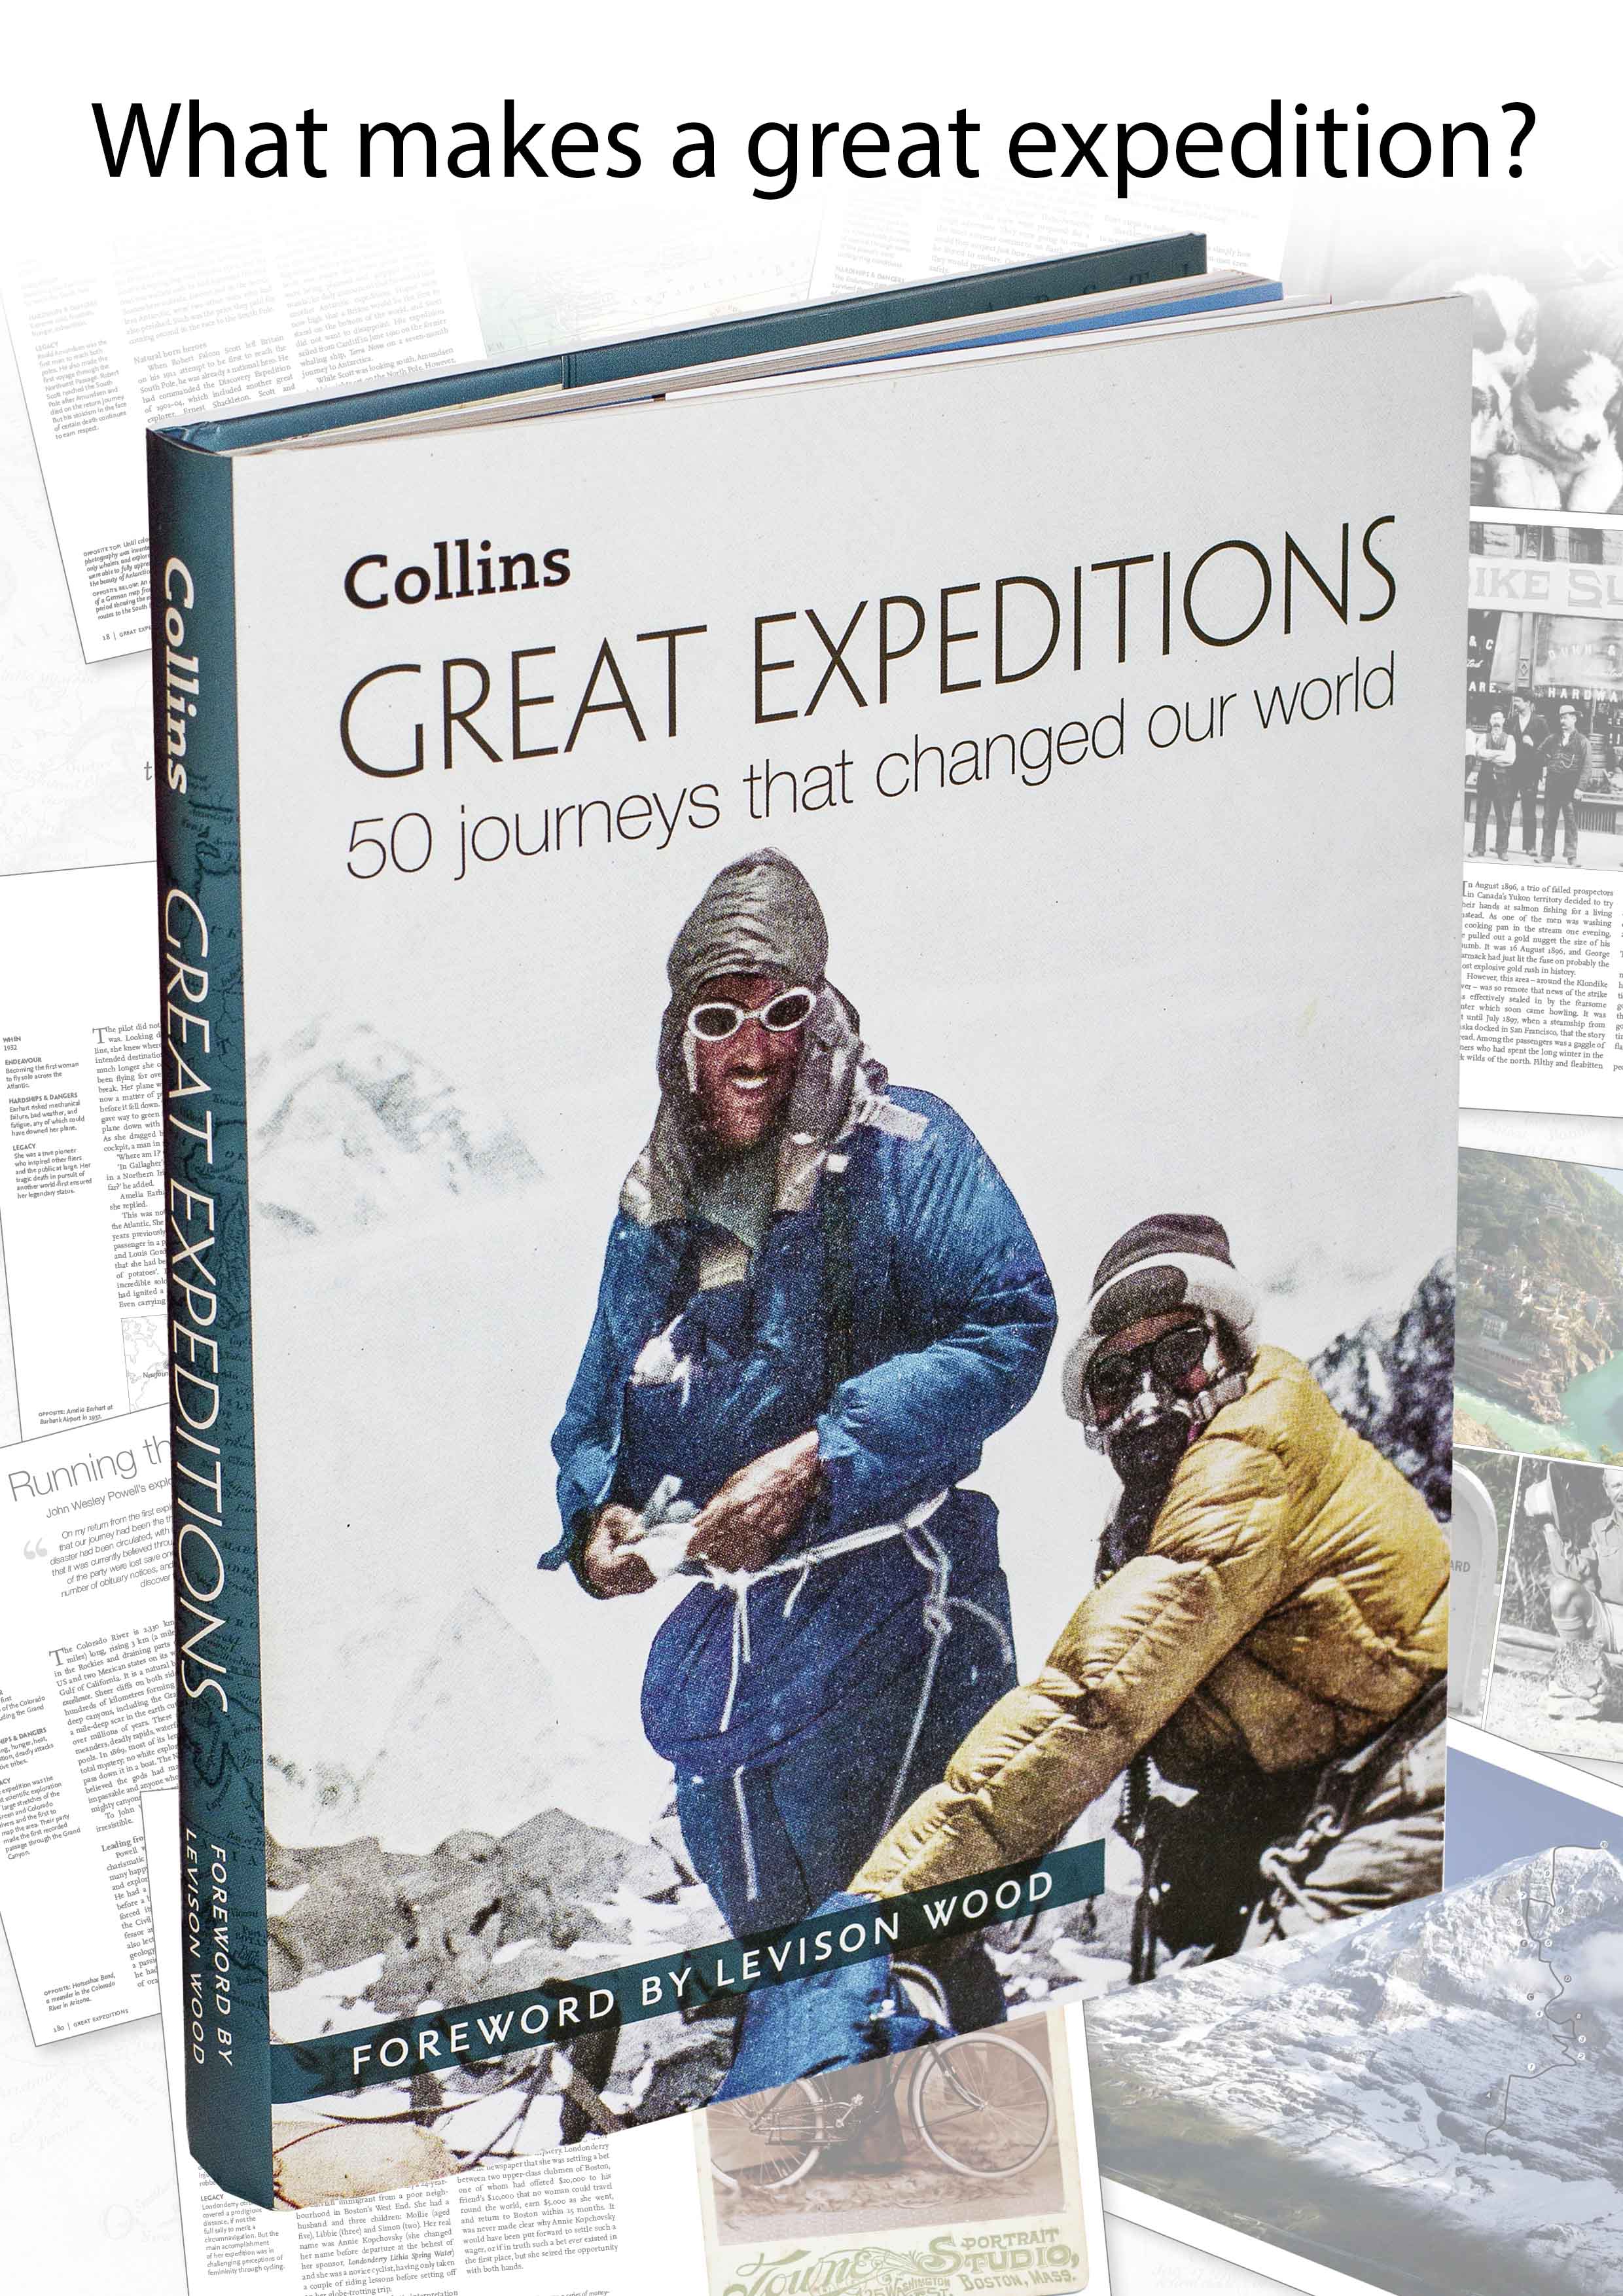 Great expeditions: 50 journeys that changed our world Tickets, Wed, 12